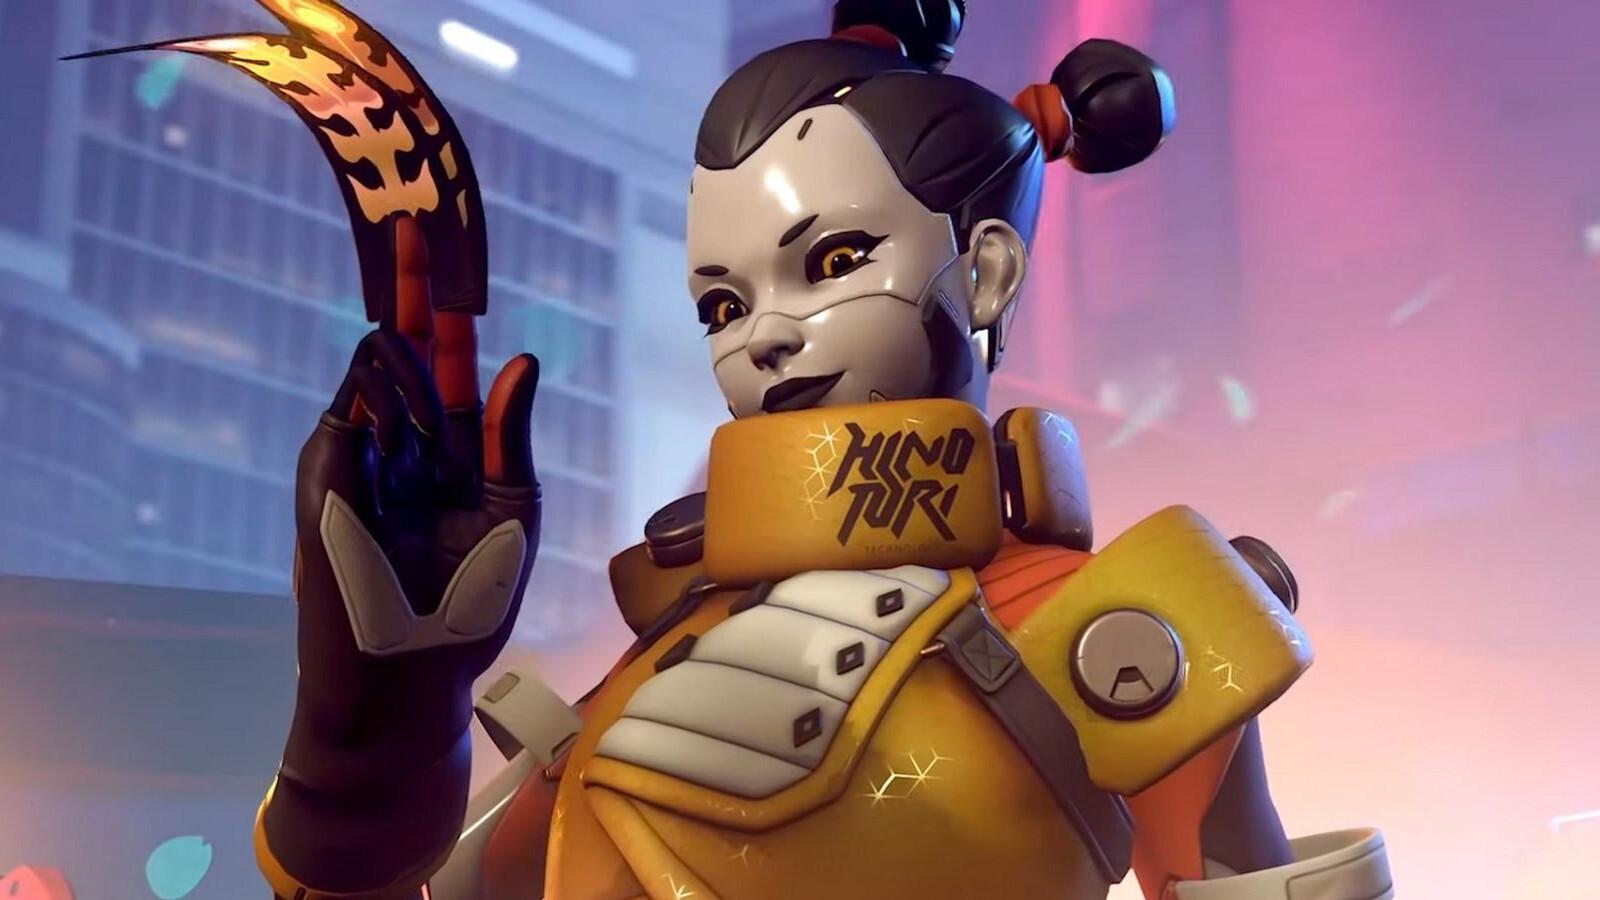 Overwatch 2 changes: Here are the biggest changes in Overwatch 2